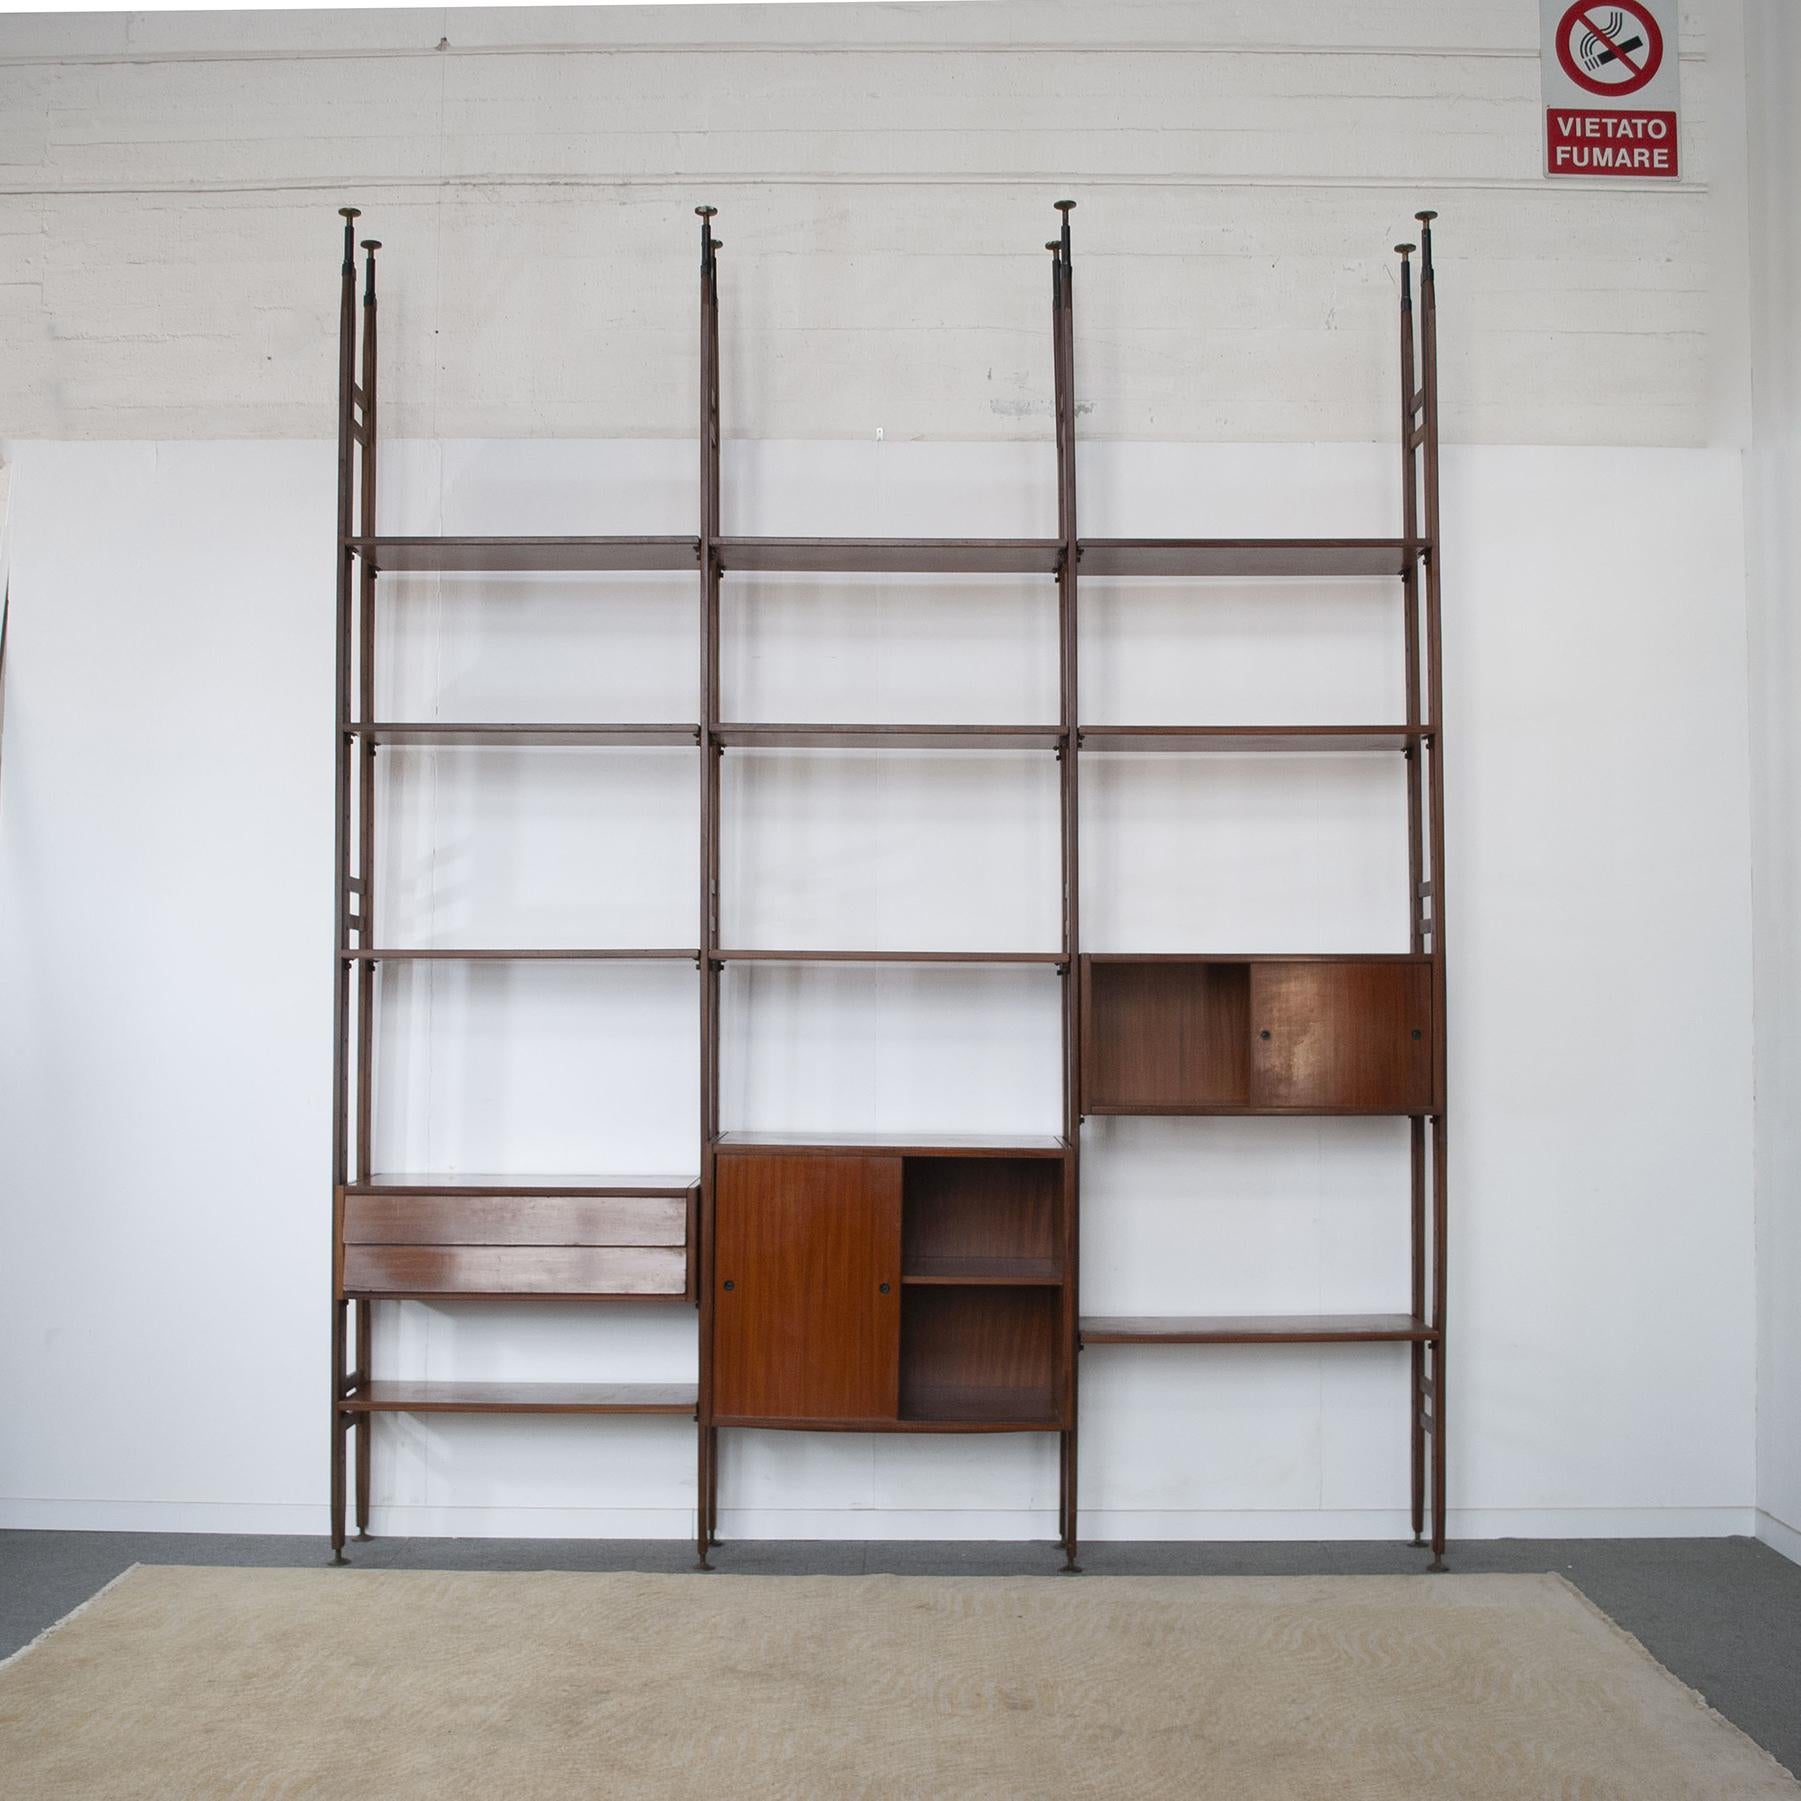 Walnut Italian Midcentury Bookcase in Wood from the Sixties